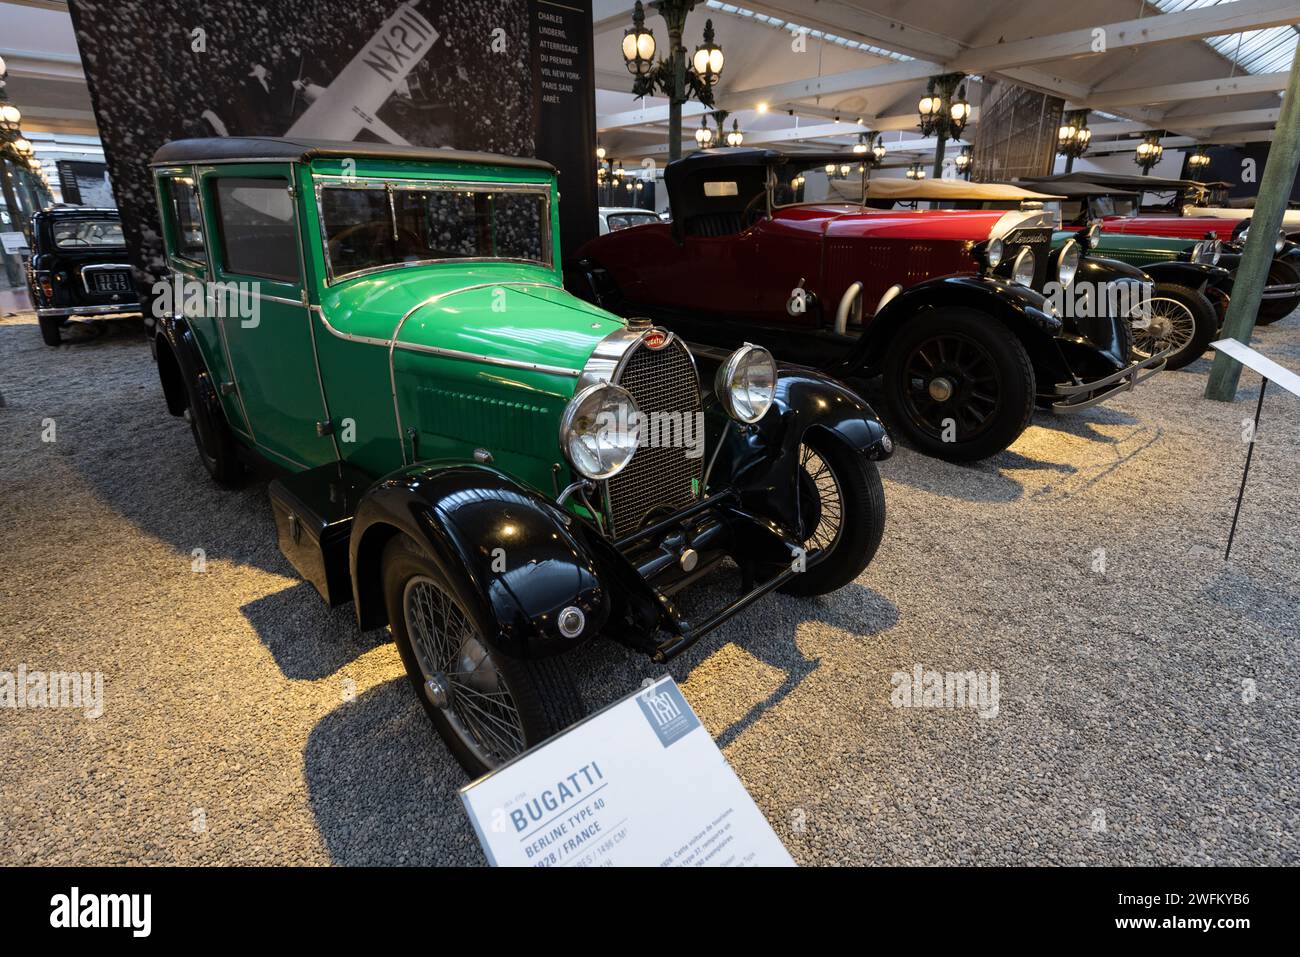 Vintage car collection in Musée National de l'Automobile, Collection Schlumpf is an automobile museum located in Mulhouse, France. Stock Photo